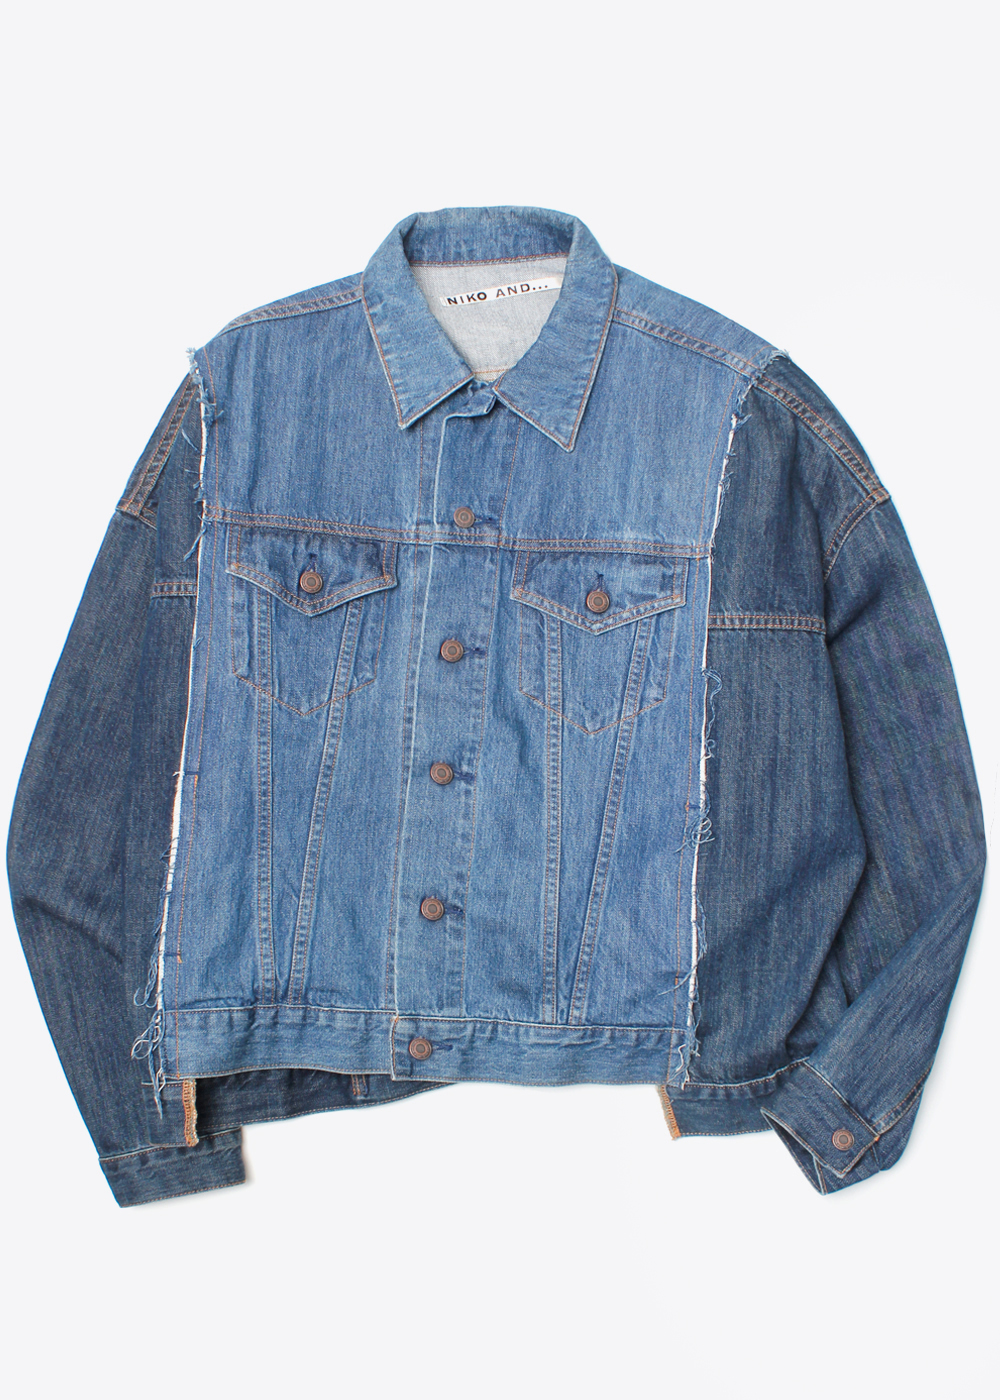 NIKO AND’over fit’ cut-off denim jacket